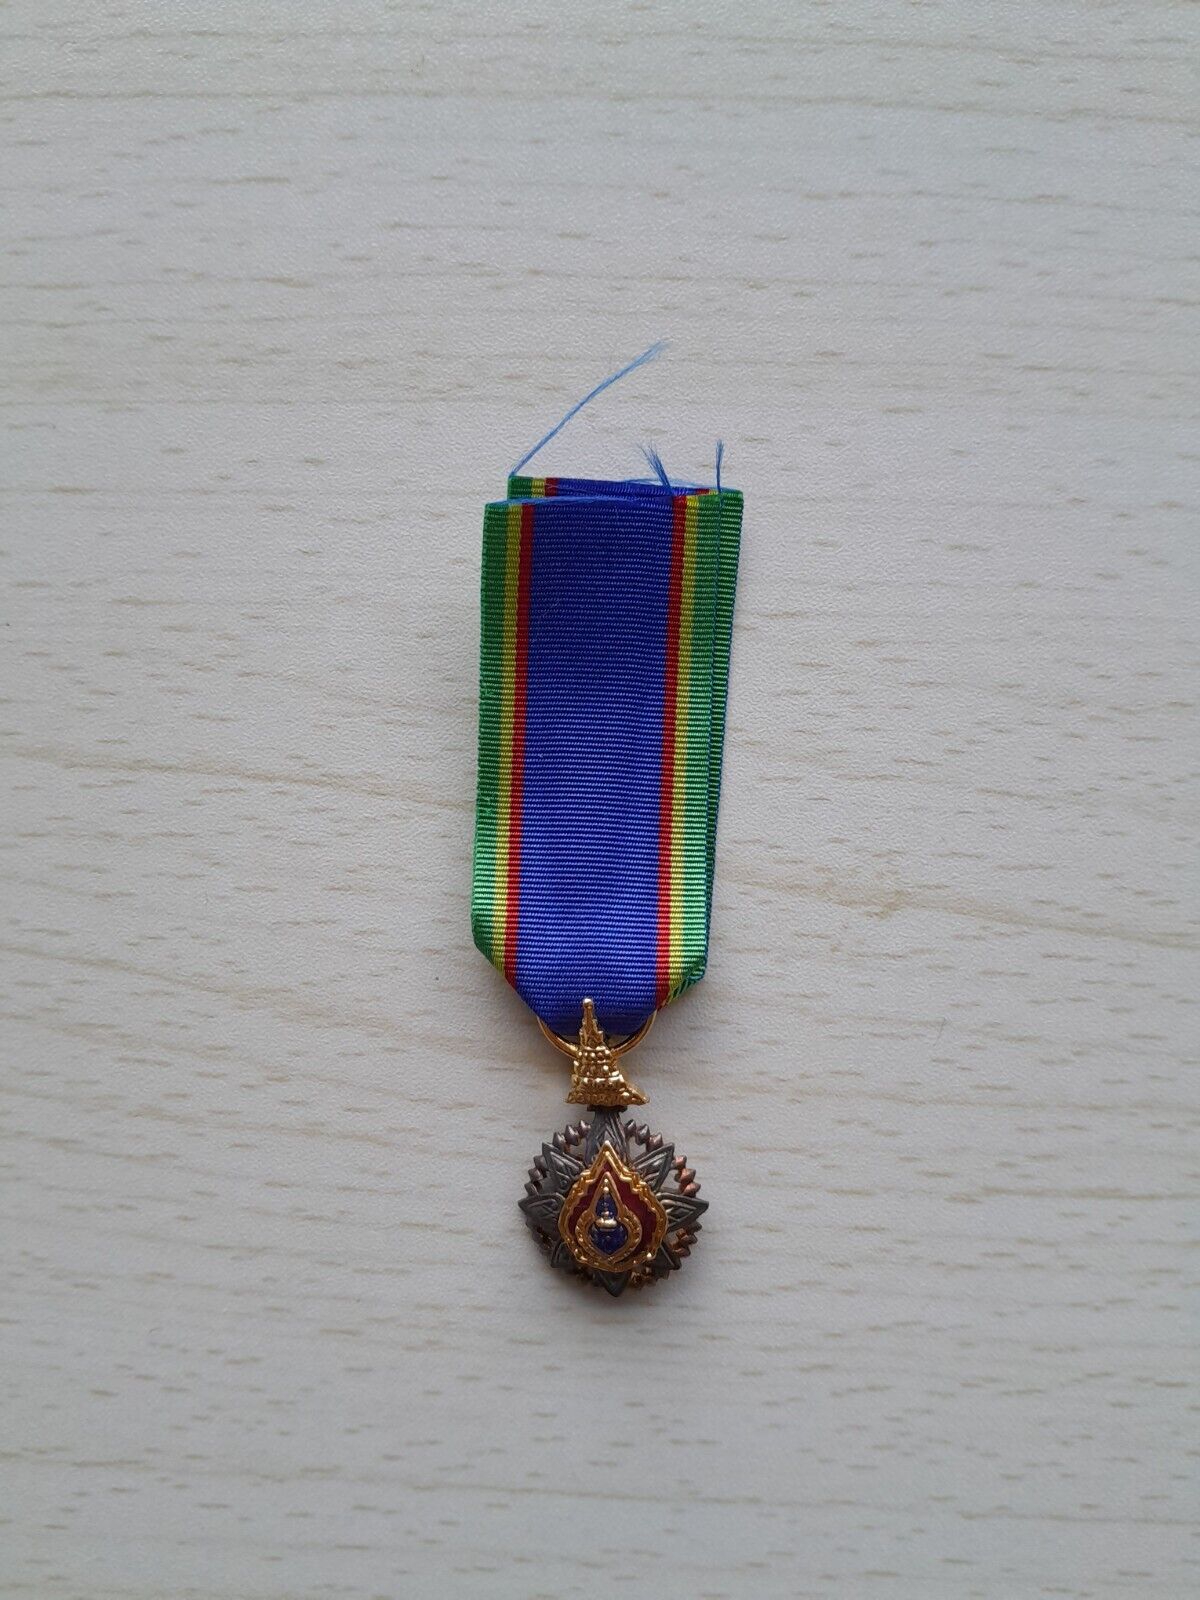 THAILAND MOST NOBLE ORDER OF THE CROWN OF THAILAND, 5TH CLASS-MINIATURE MEDAL